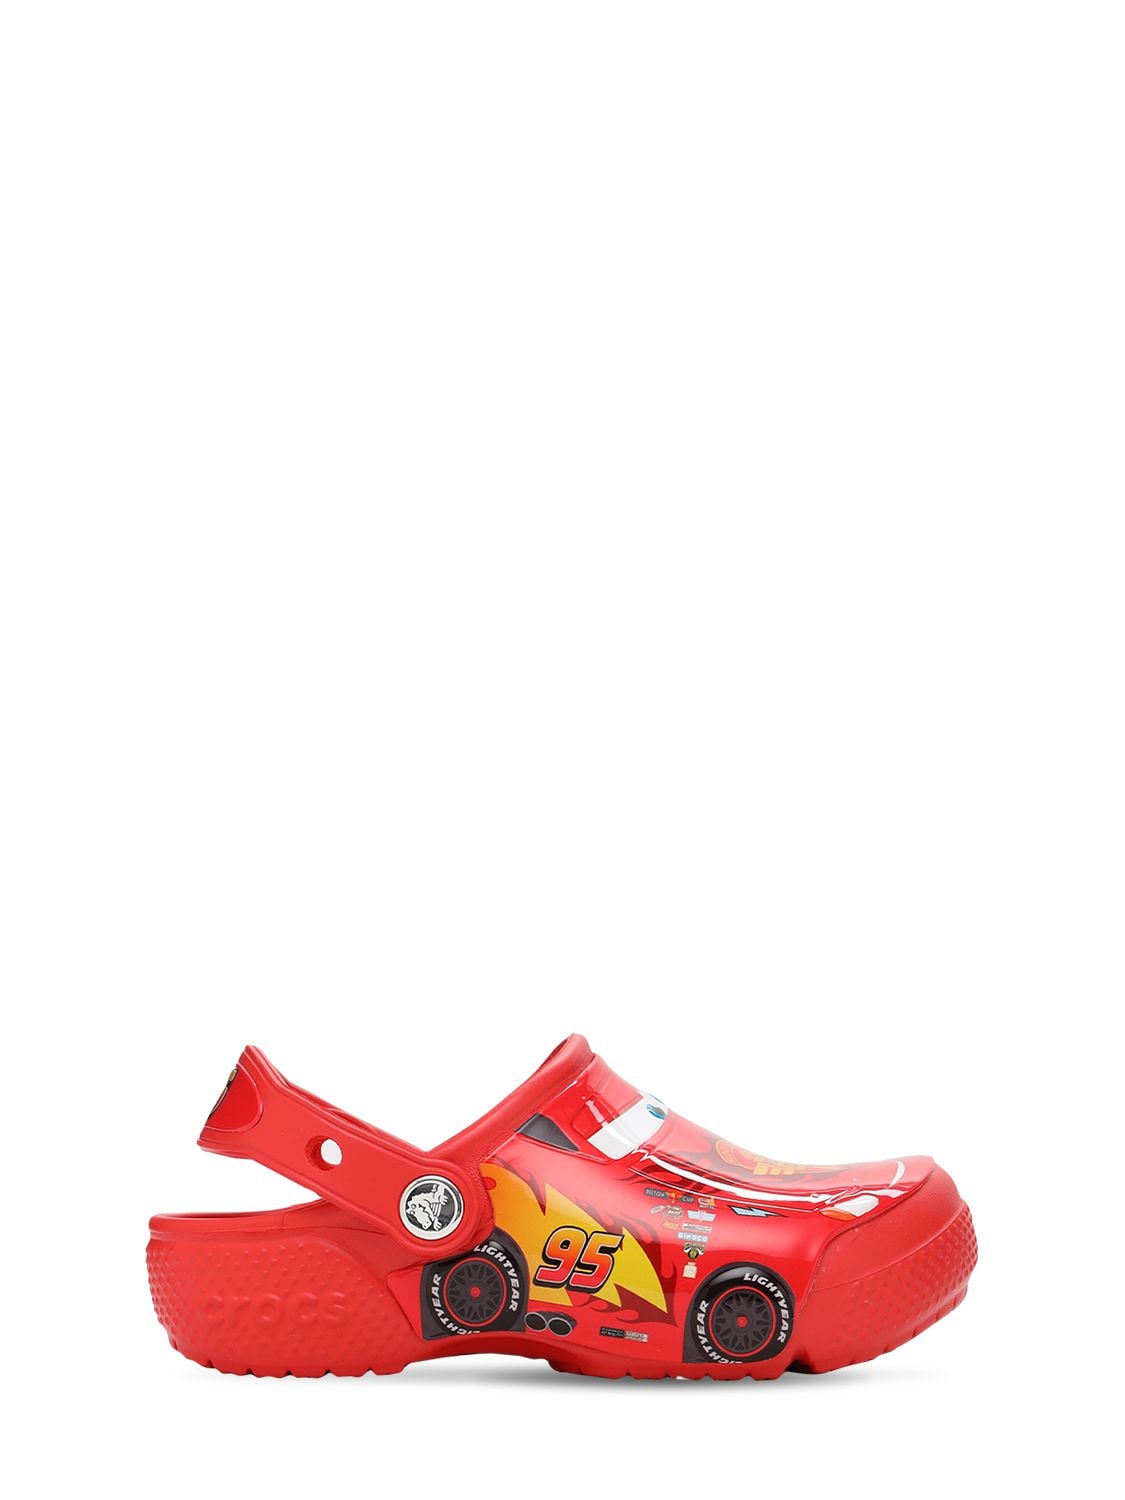 Crocs Kids' Cars Print Rubber In Red | ModeSens